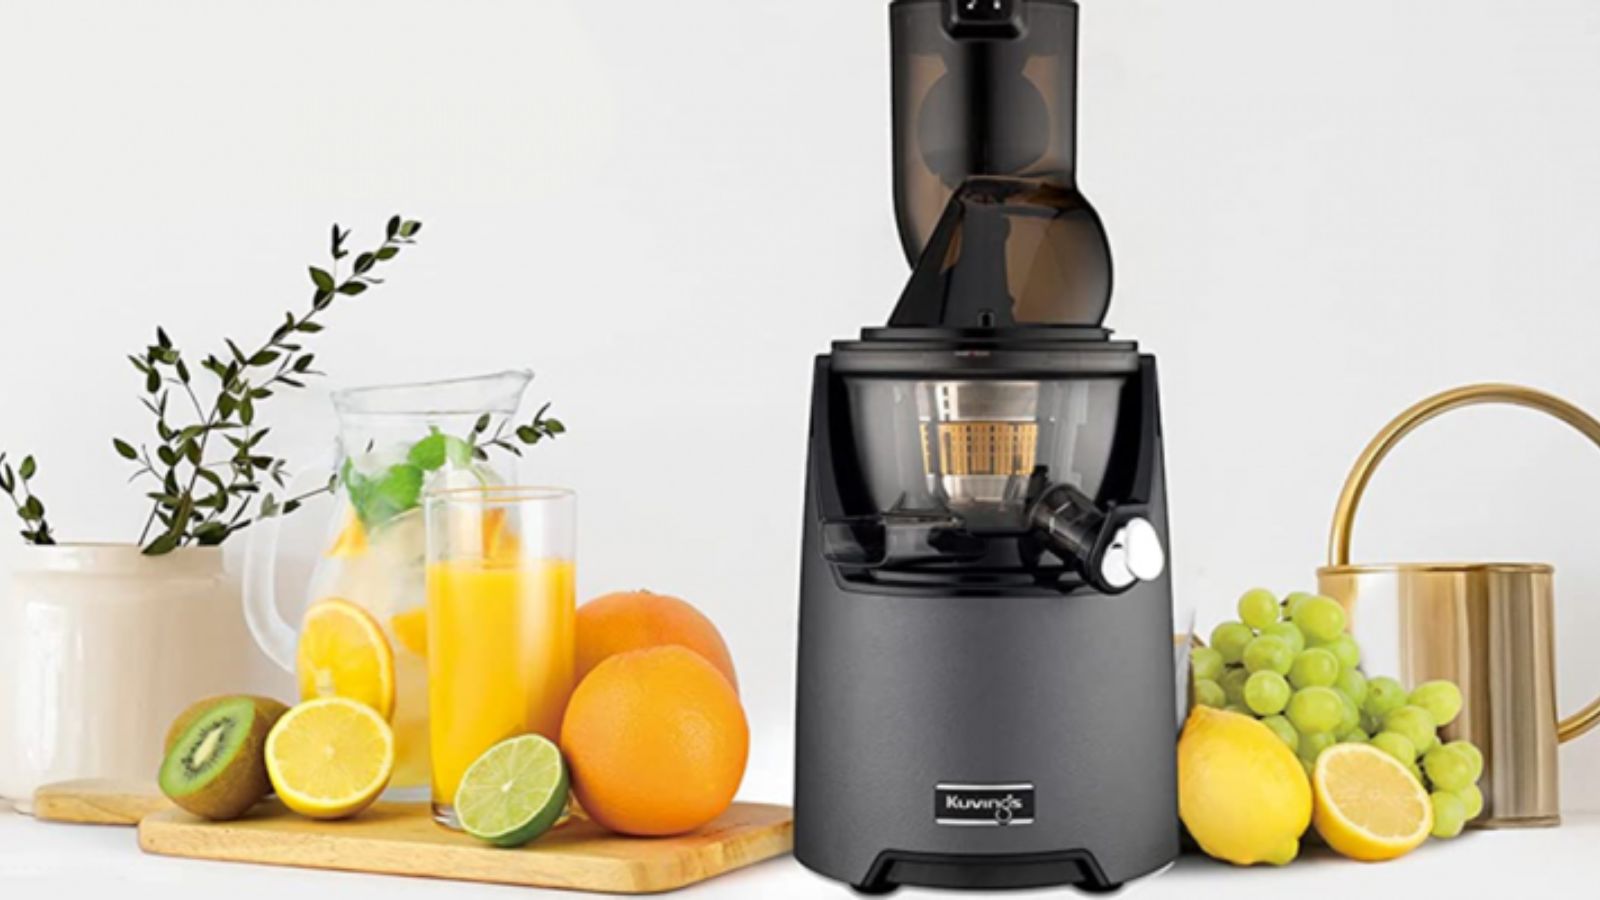 Top Rated Products in Blenders & Juicers